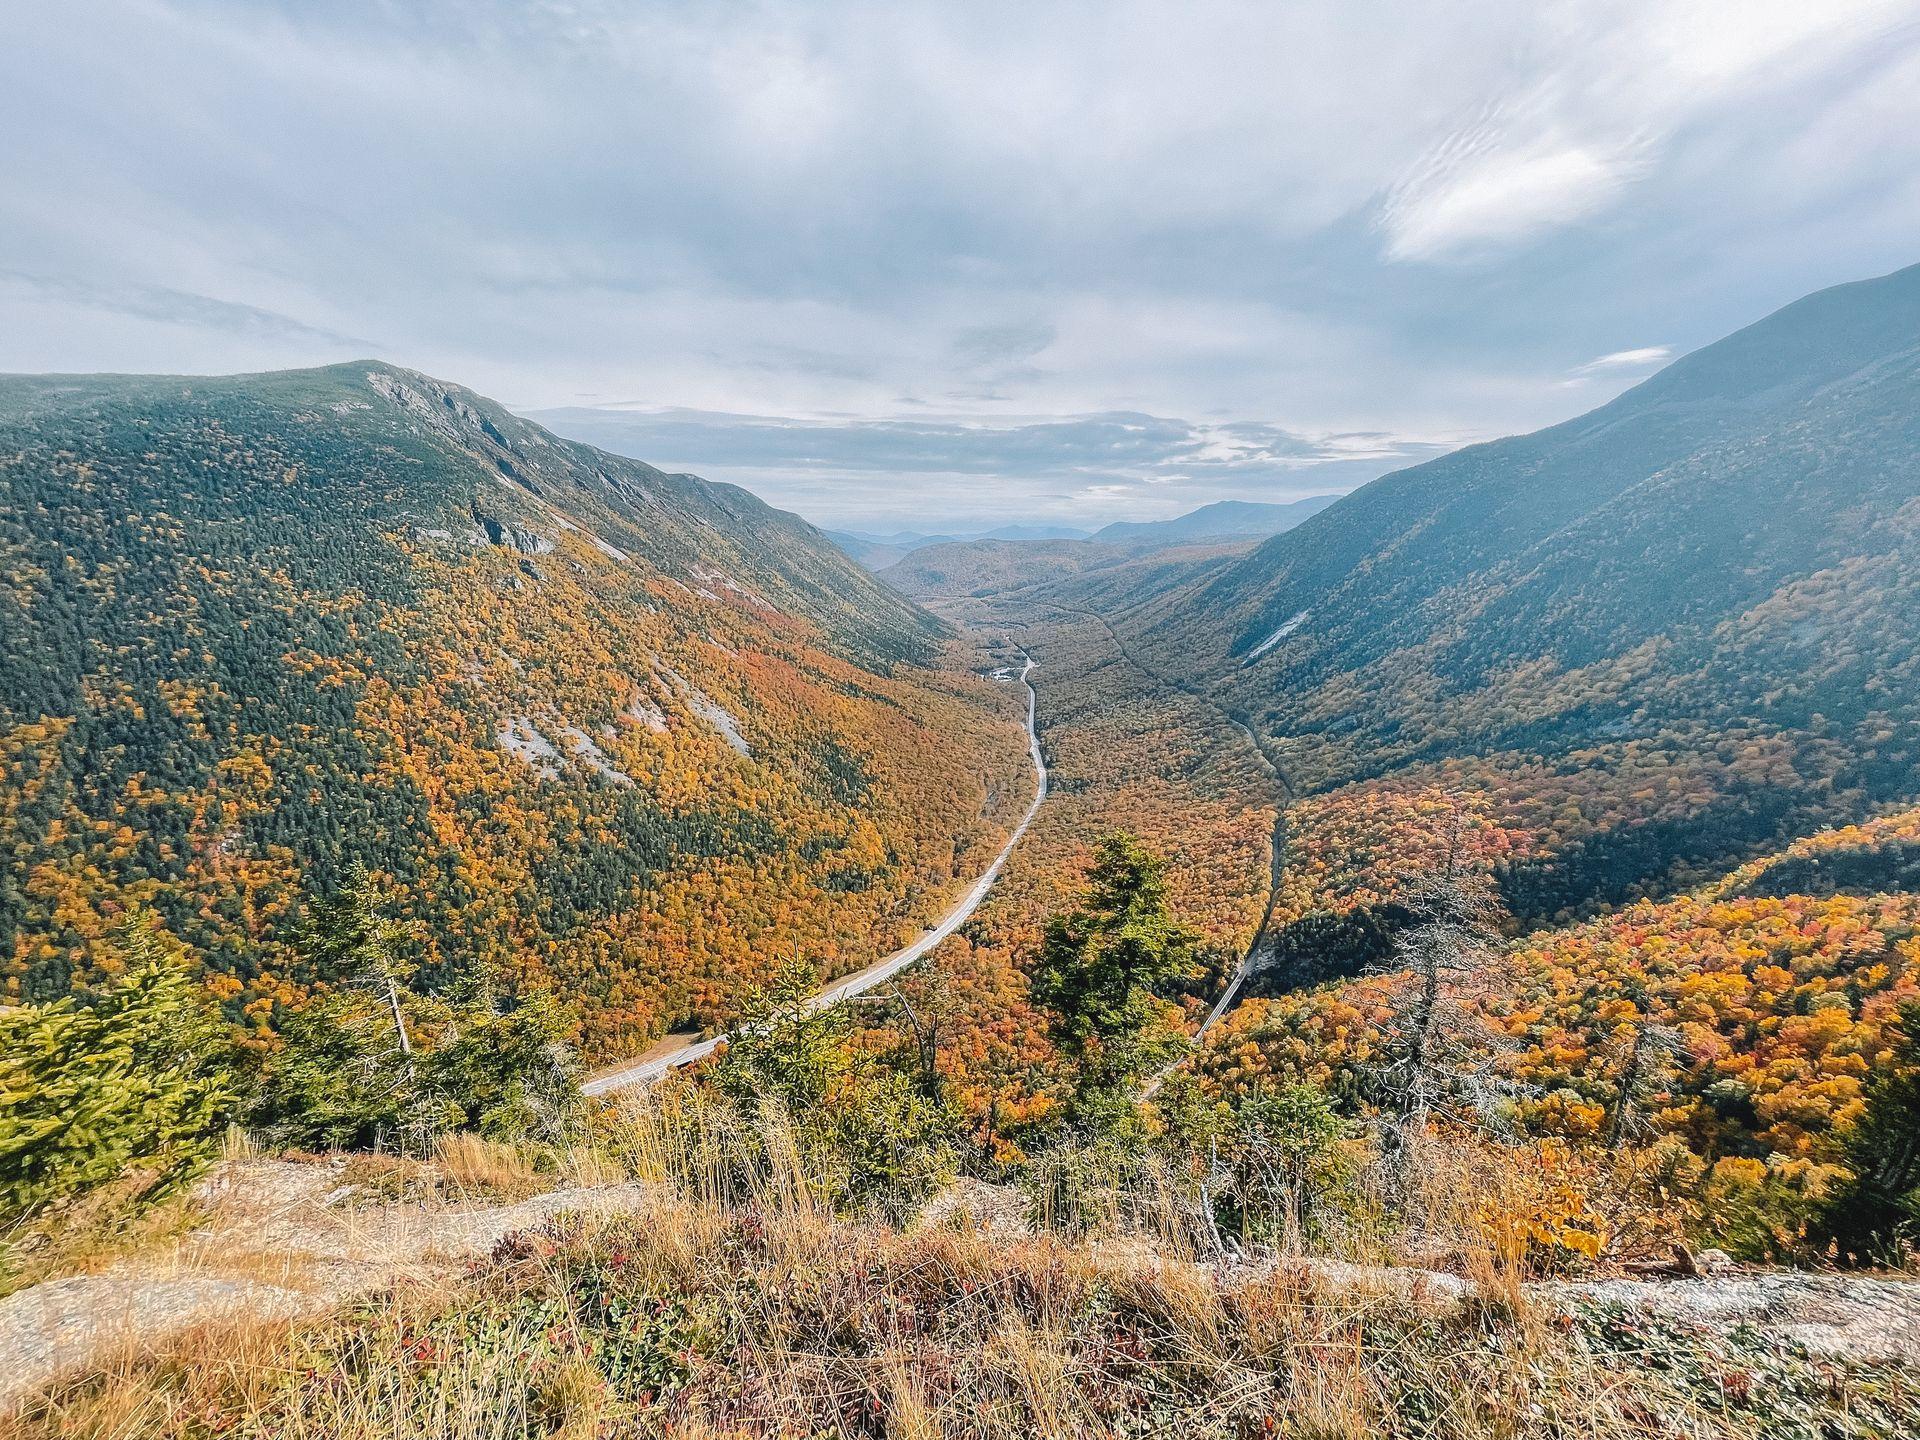 The view from Mount Willard. There is a road in the center of two mountains and the hills are covered with orange foliage.